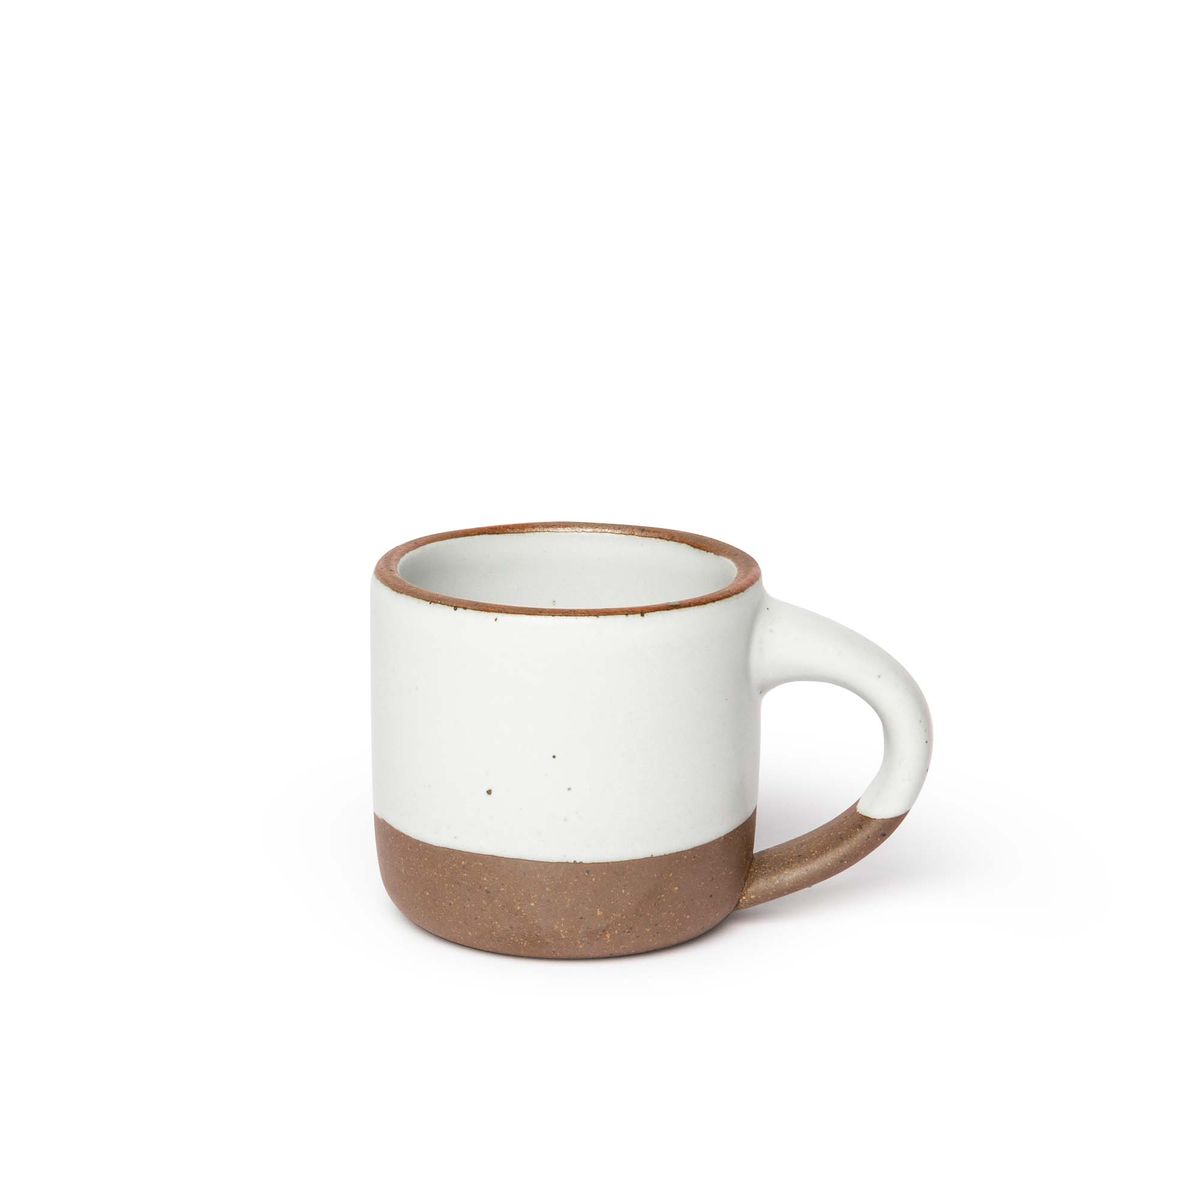 A small sized ceramic mug with handle in a cool white glaze featuring iron speckles and unglazed rim and bottom base.